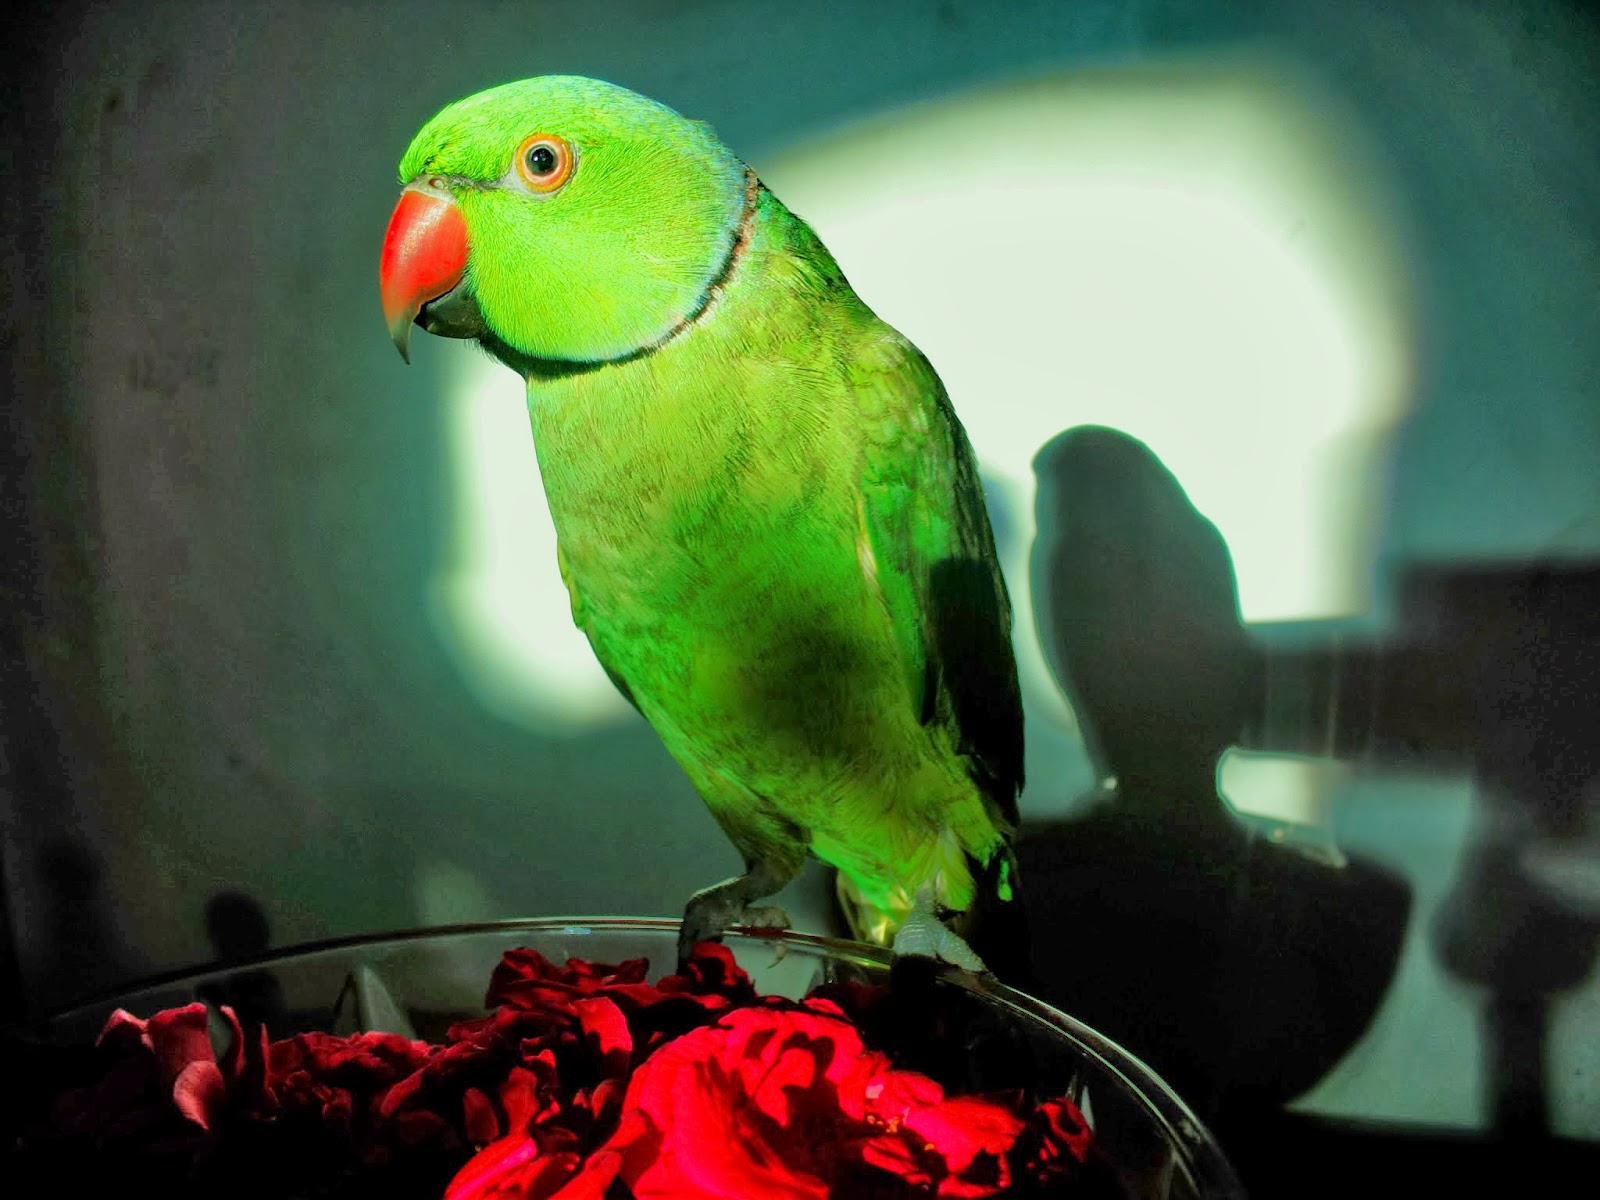 Free Hd Desktop Wallpapers For Widescreen, High Definition - High Resolution Images Of Parrot - HD Wallpaper 